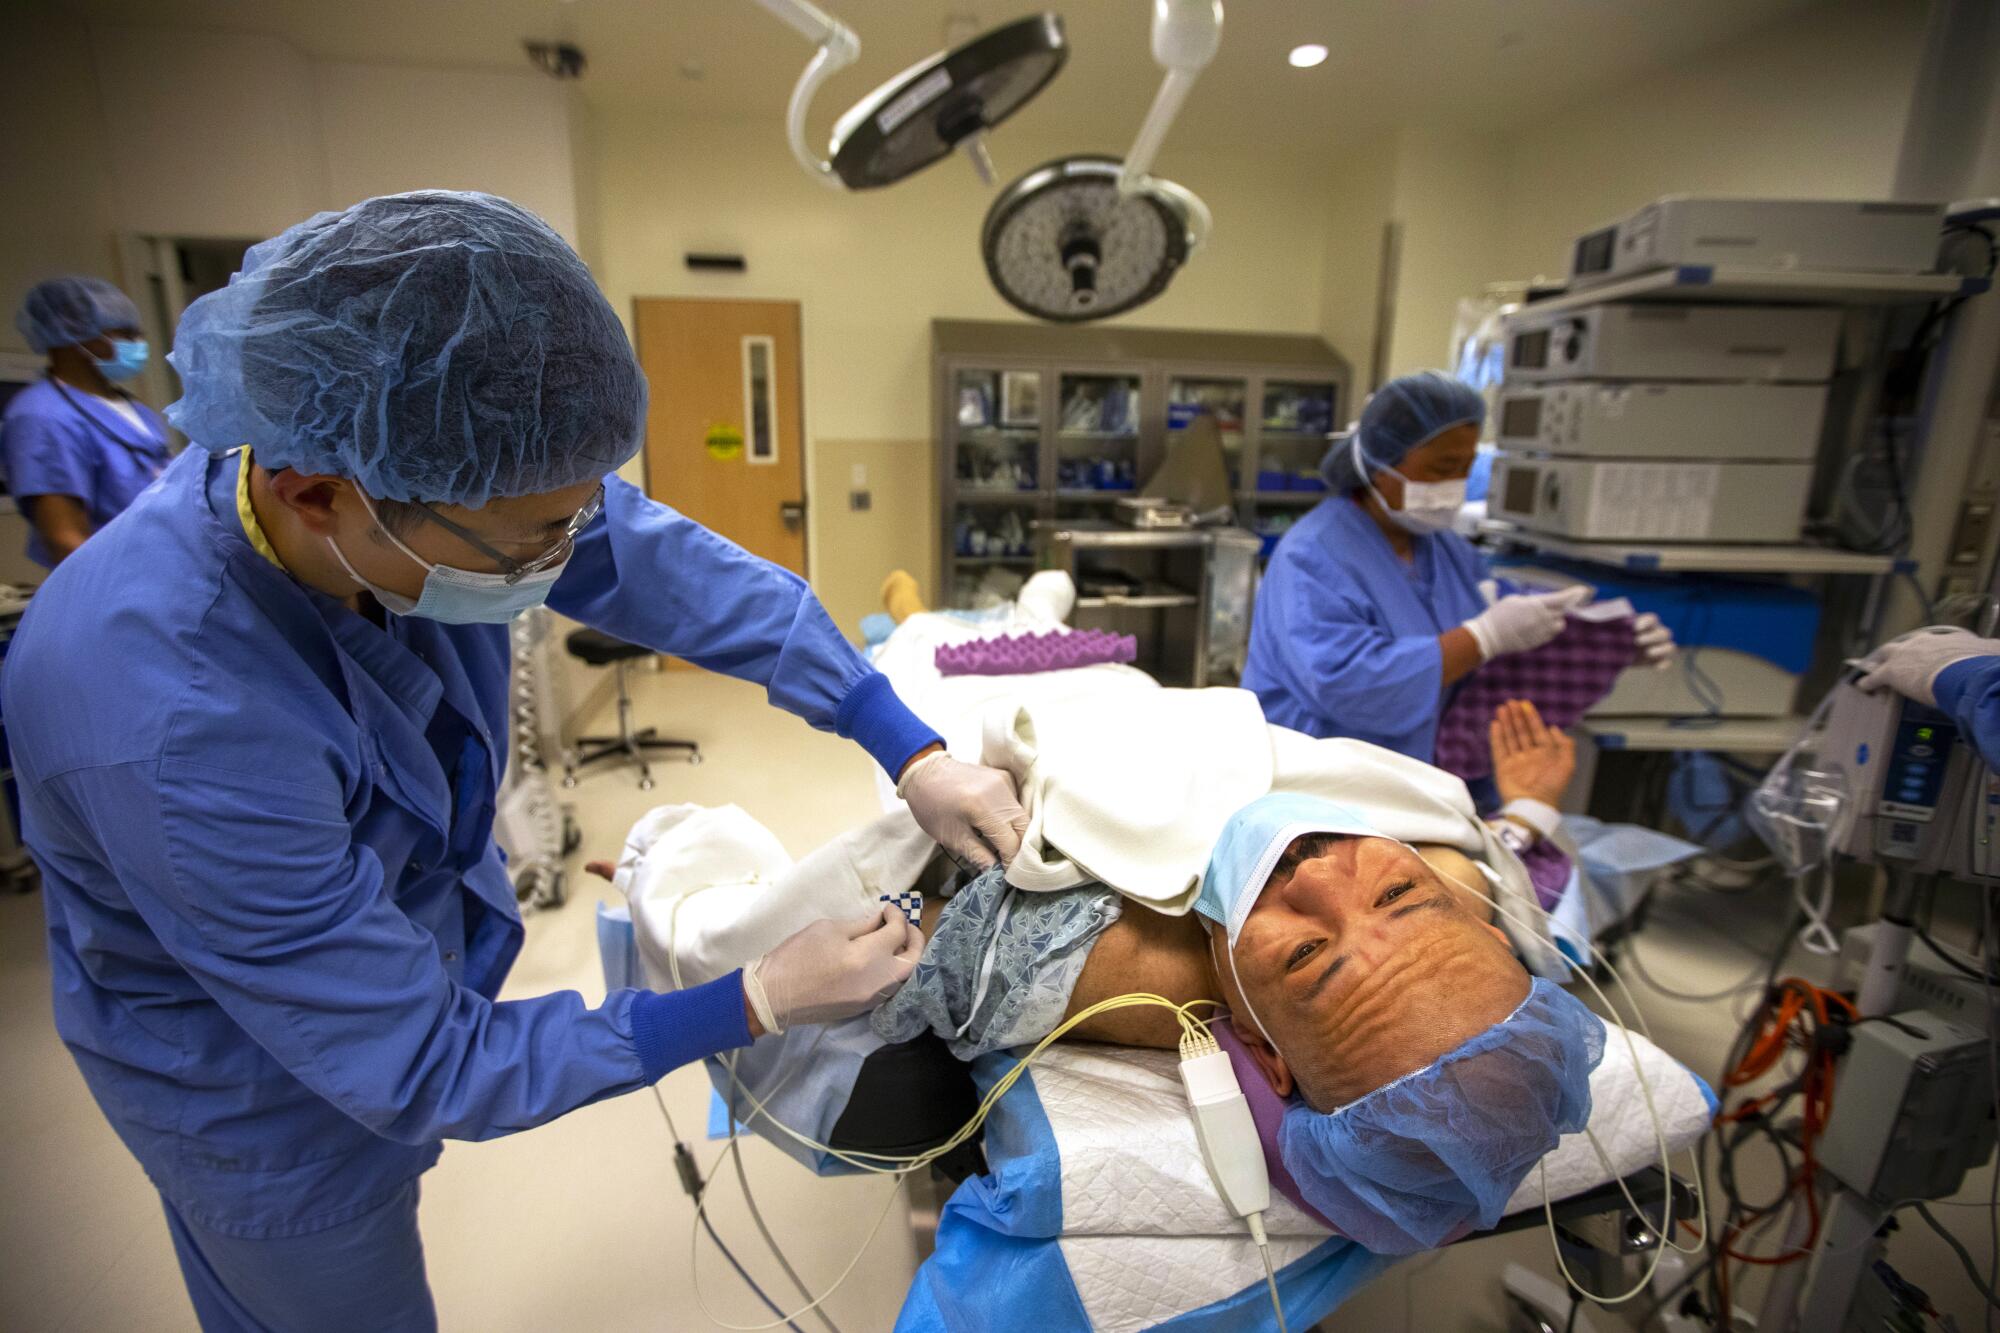 Tony Zamora in the operating room as Dr. J. Shin, anesthesiologist, left, prepares to put him under for surgery.